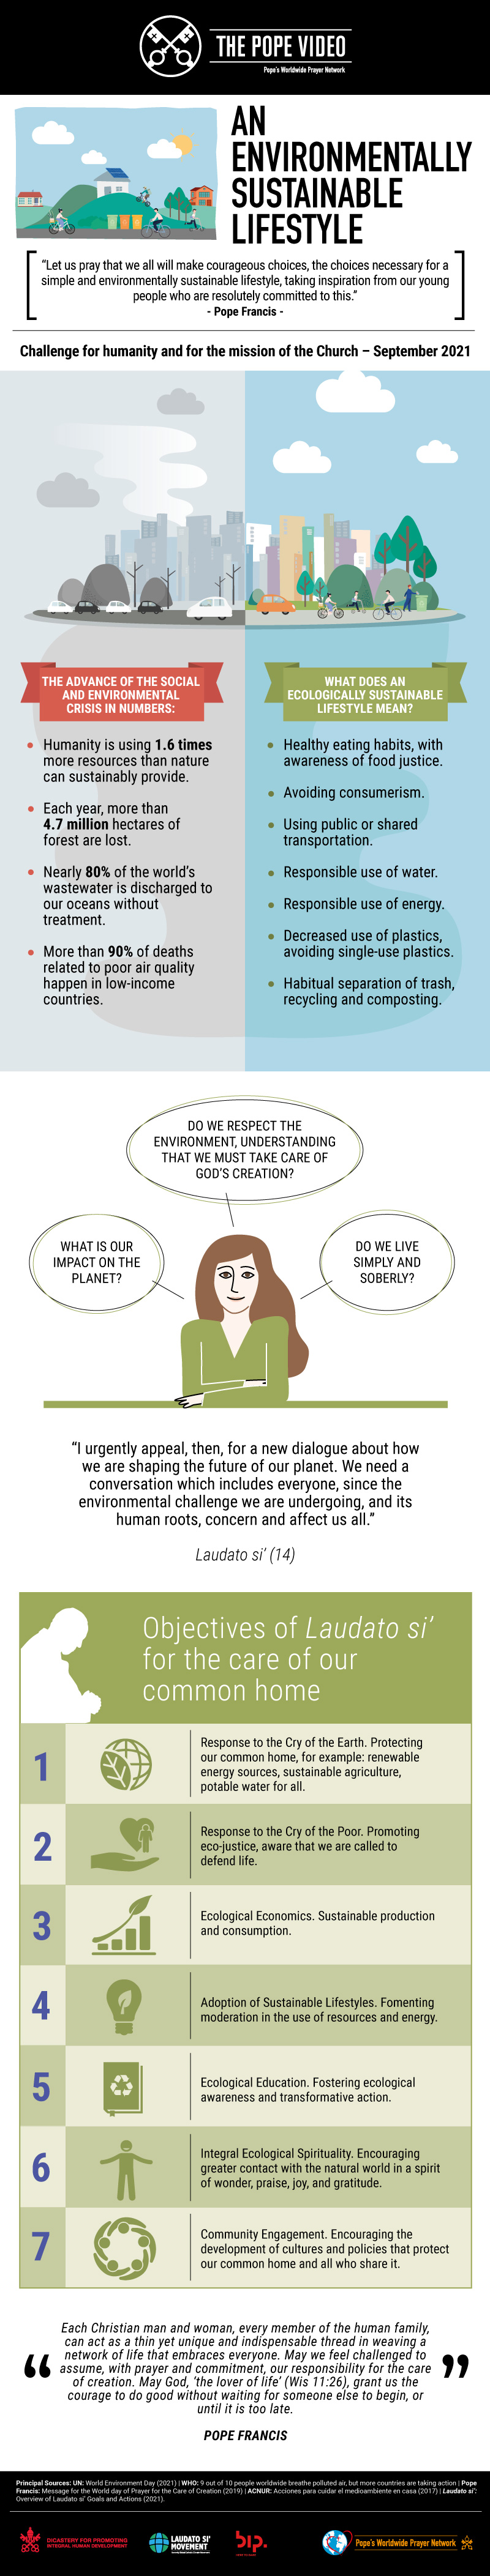 Infographic-TPV-9-2021-EN-An-Environmentally-Sustainable-Lifestyle.jpeg